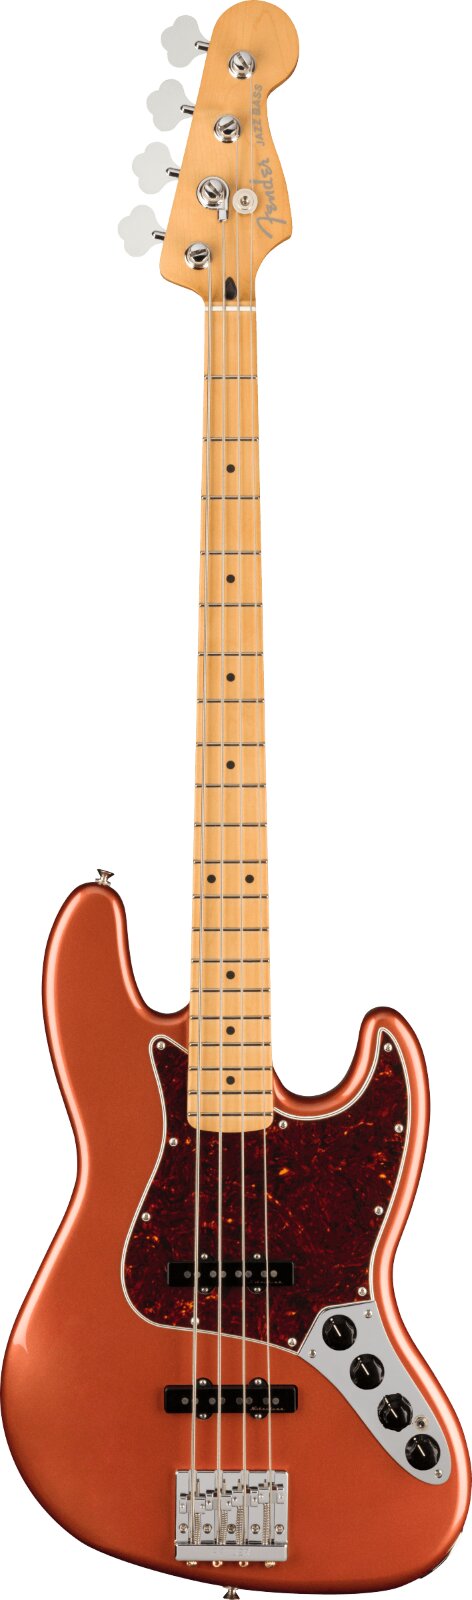 Fender Player Plus Jazz Bass, Ahorngriffbrett, Aged Candy Apple Red : photo 1